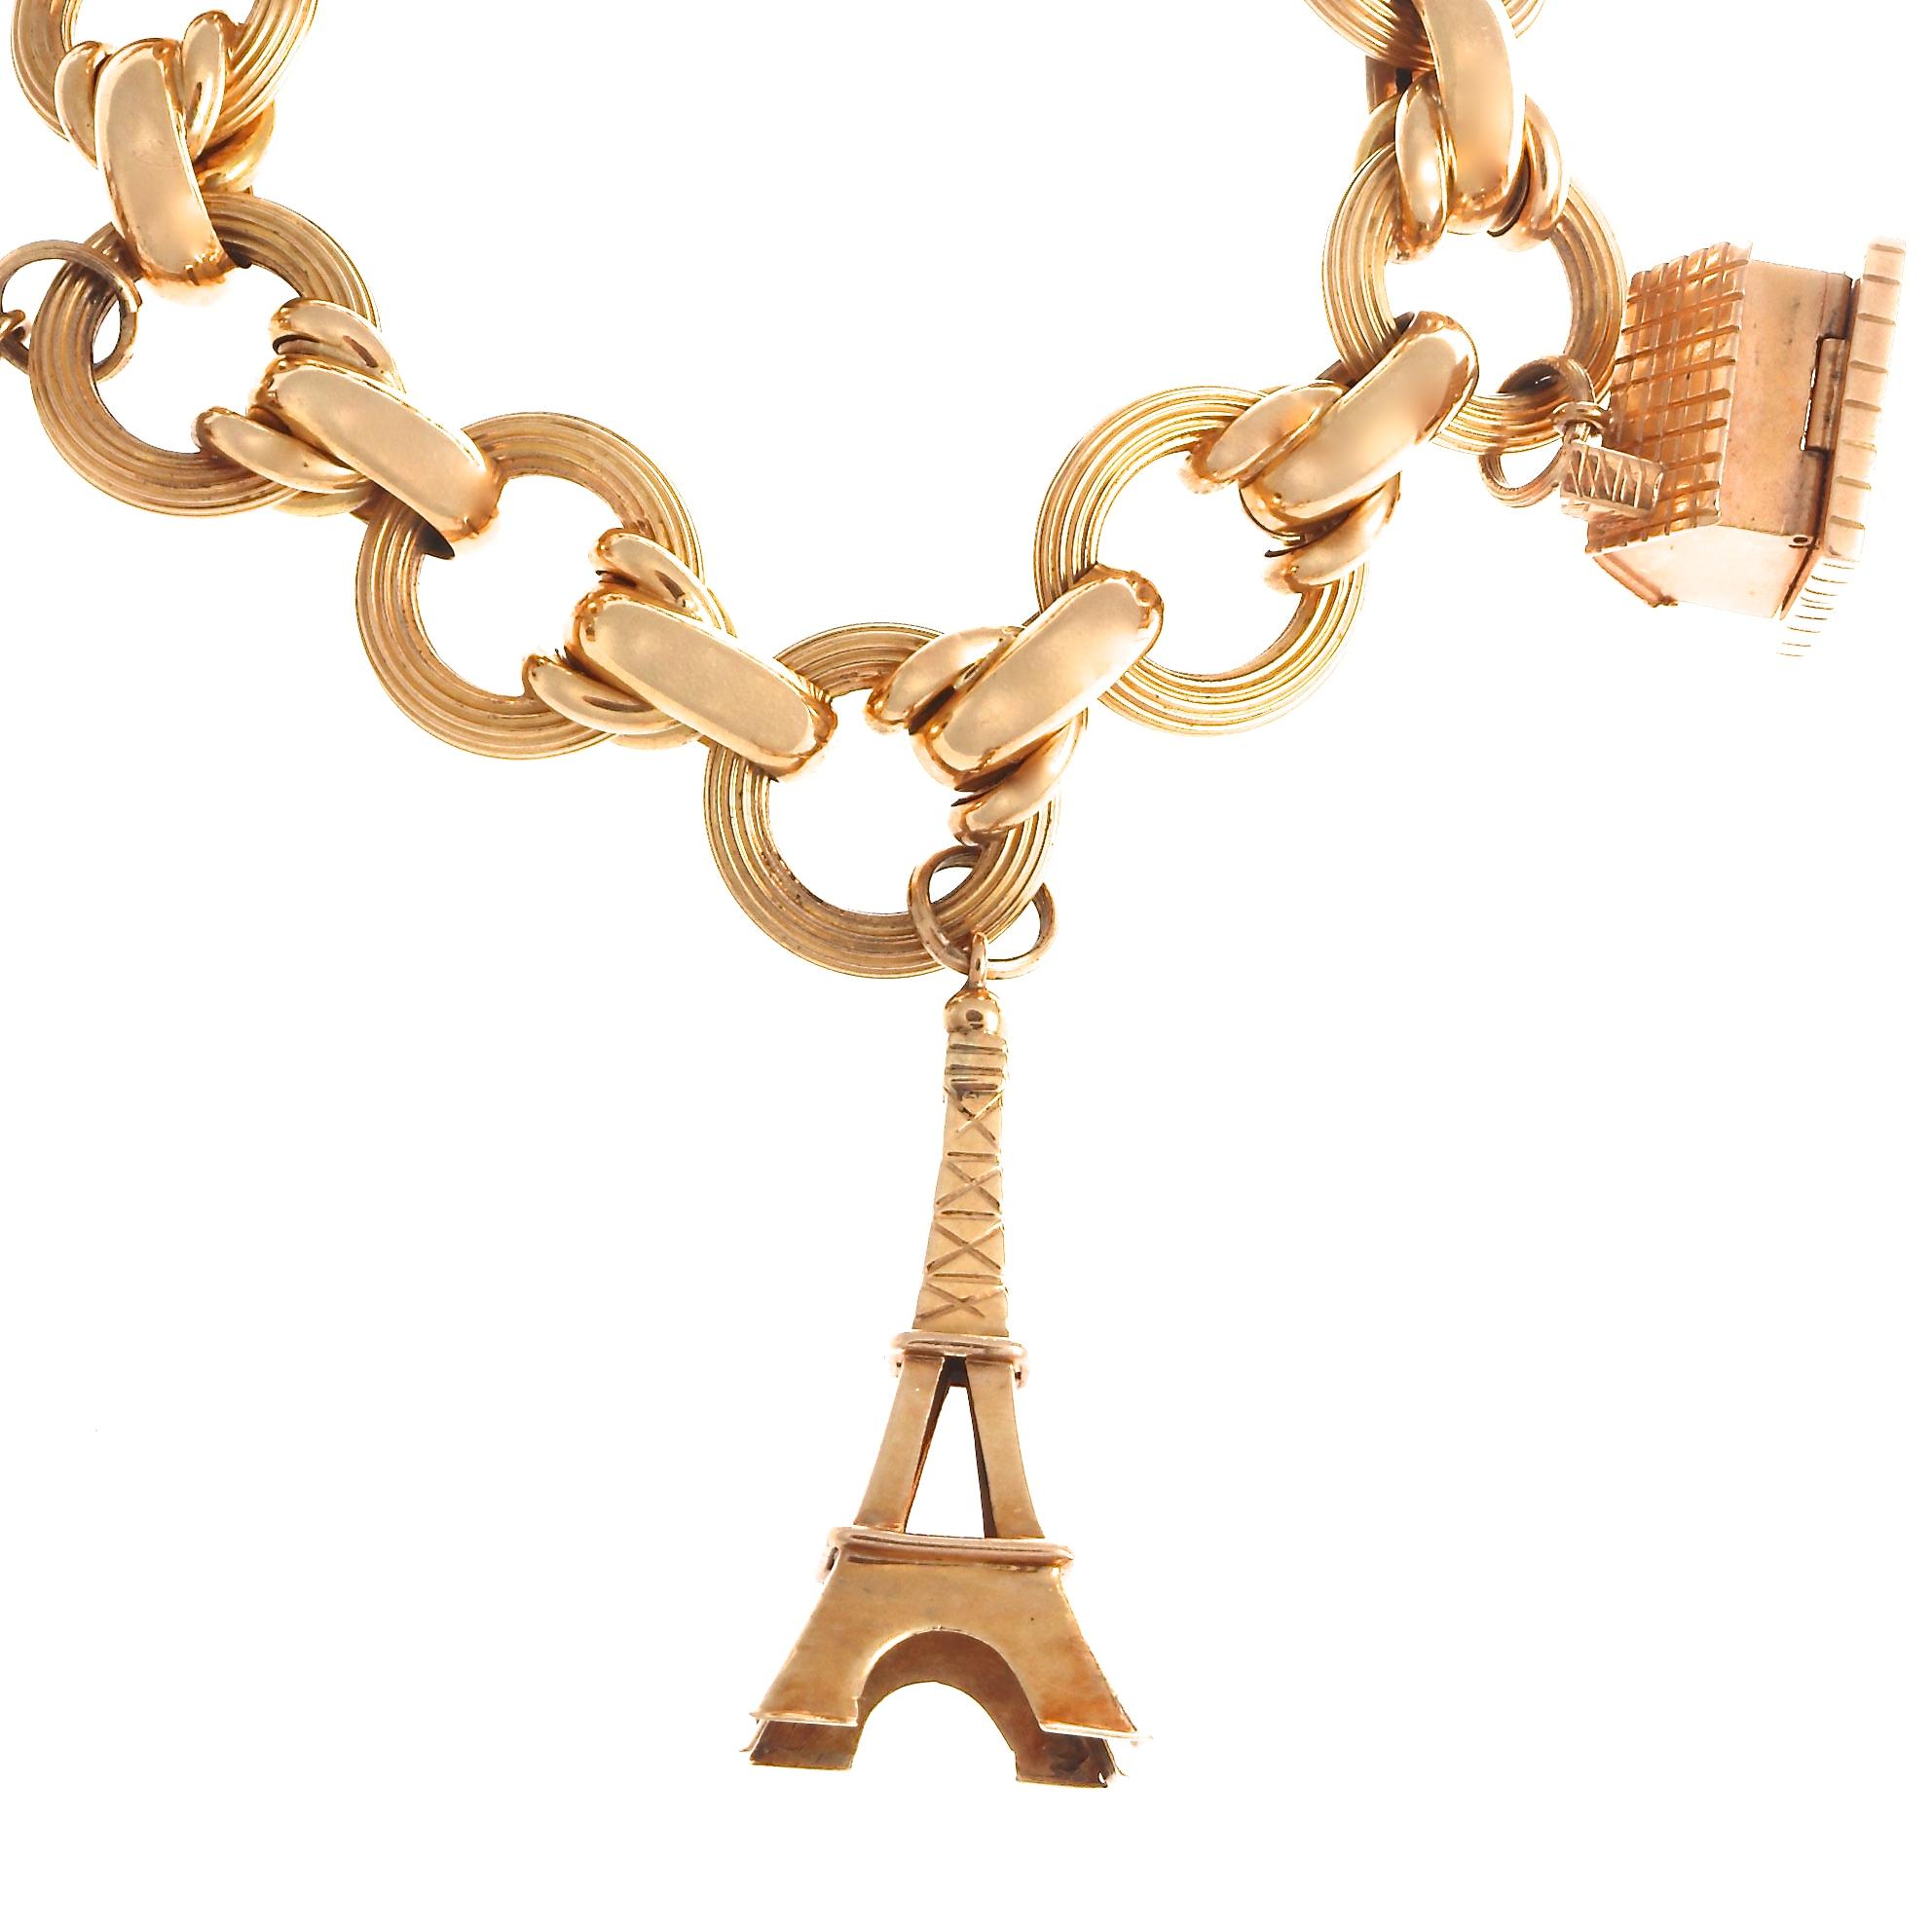 Chunky gold links are adorned with five unique and refined 18k gold charms. The items are a baby carriage, house, boot, Eiffel tower and a sexy pair of high heels.  A fun vintage charm bracelet from the 1960's  Weighs 45.5 grams.